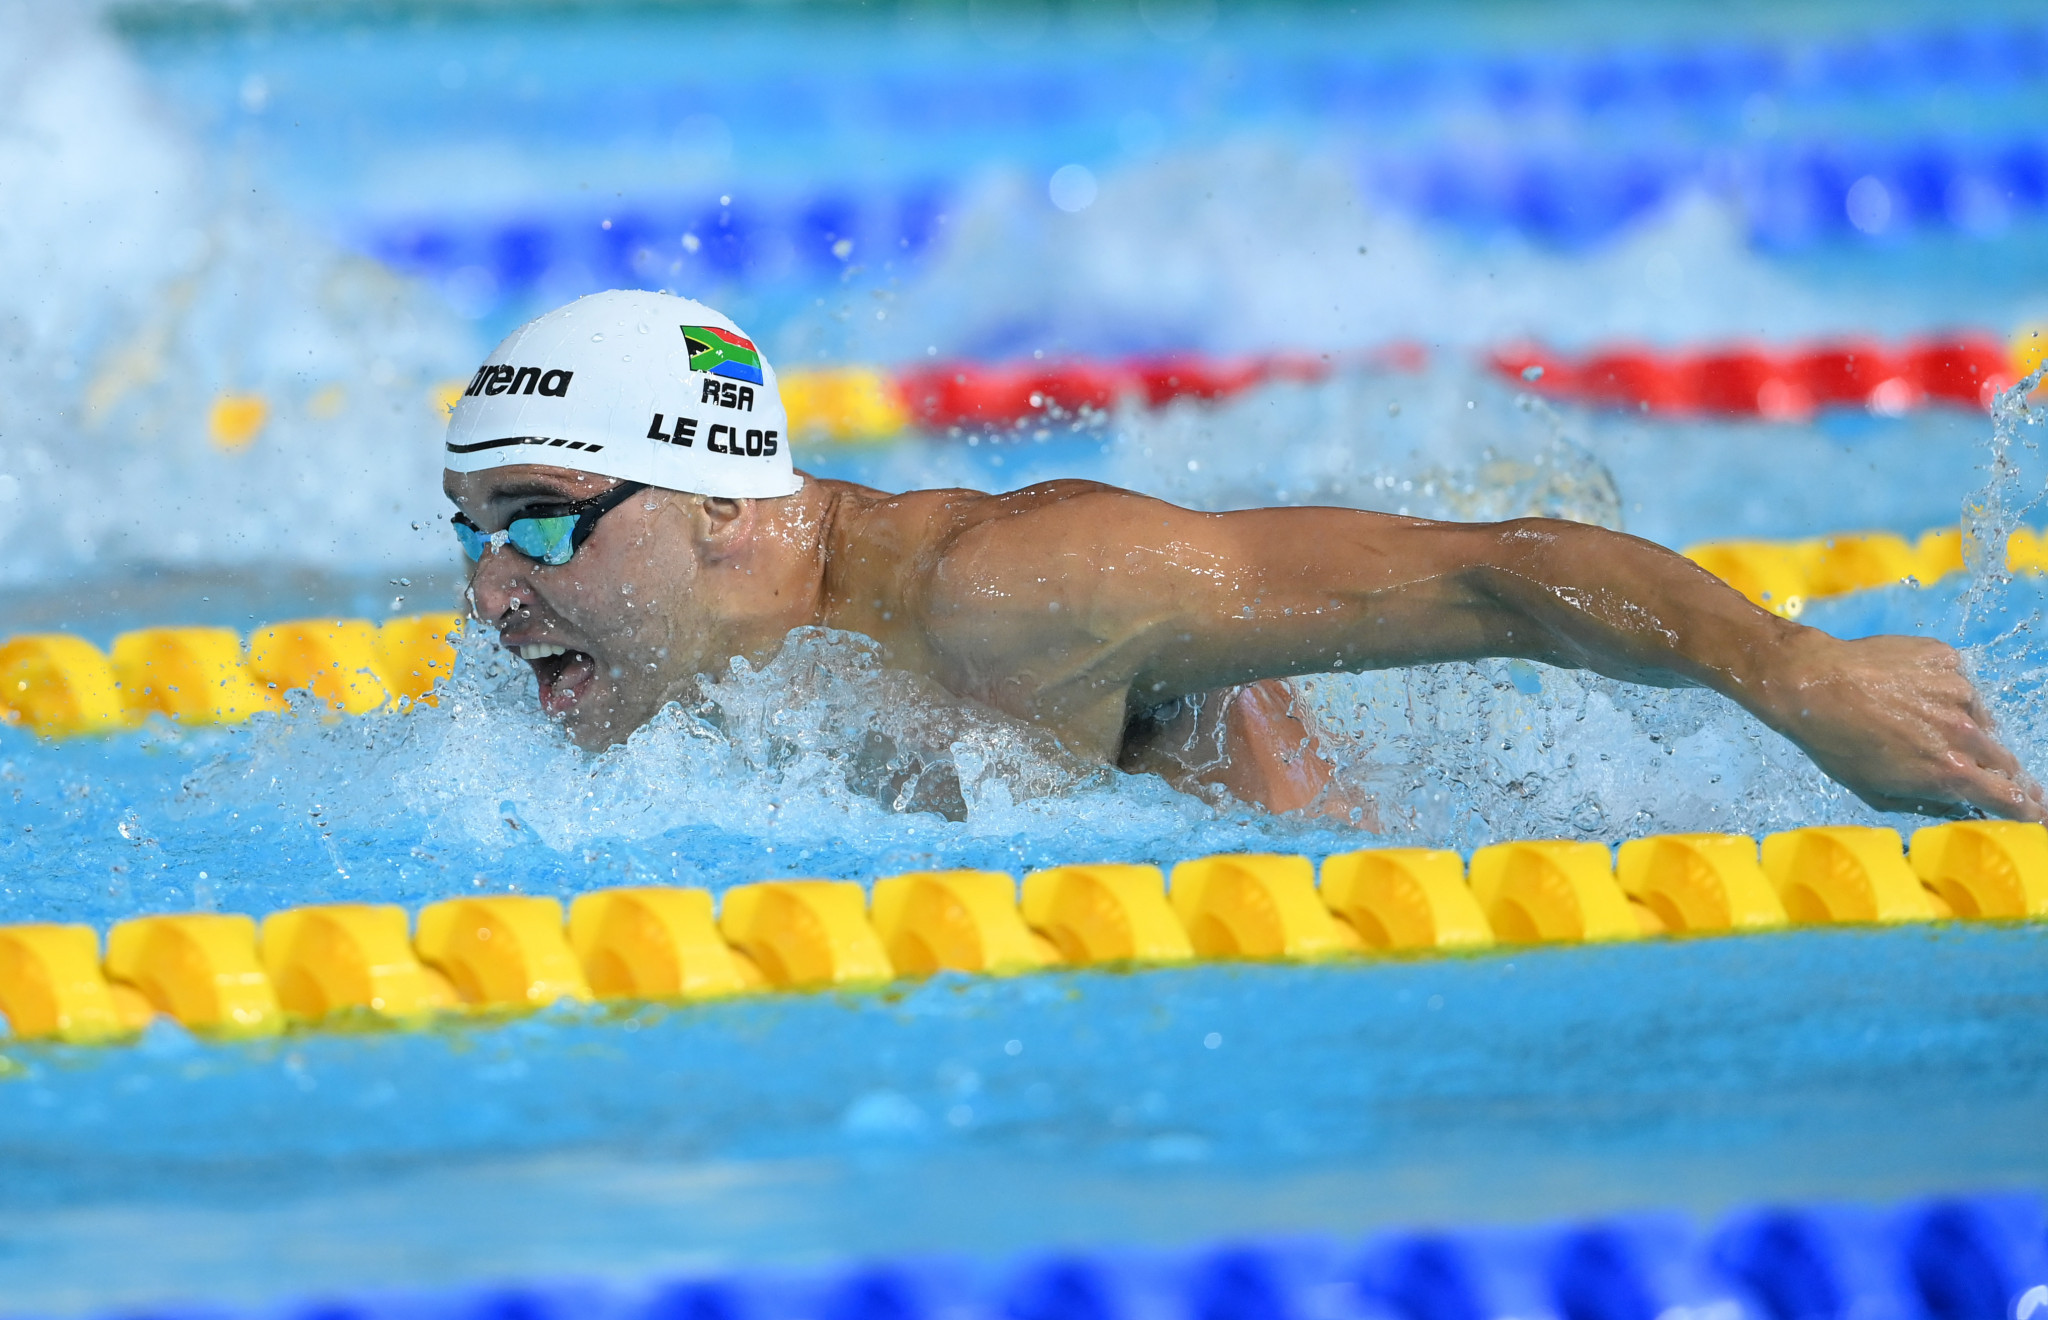 Le Clos moves to Frankurt for training prior to Paris 2024 Olympics